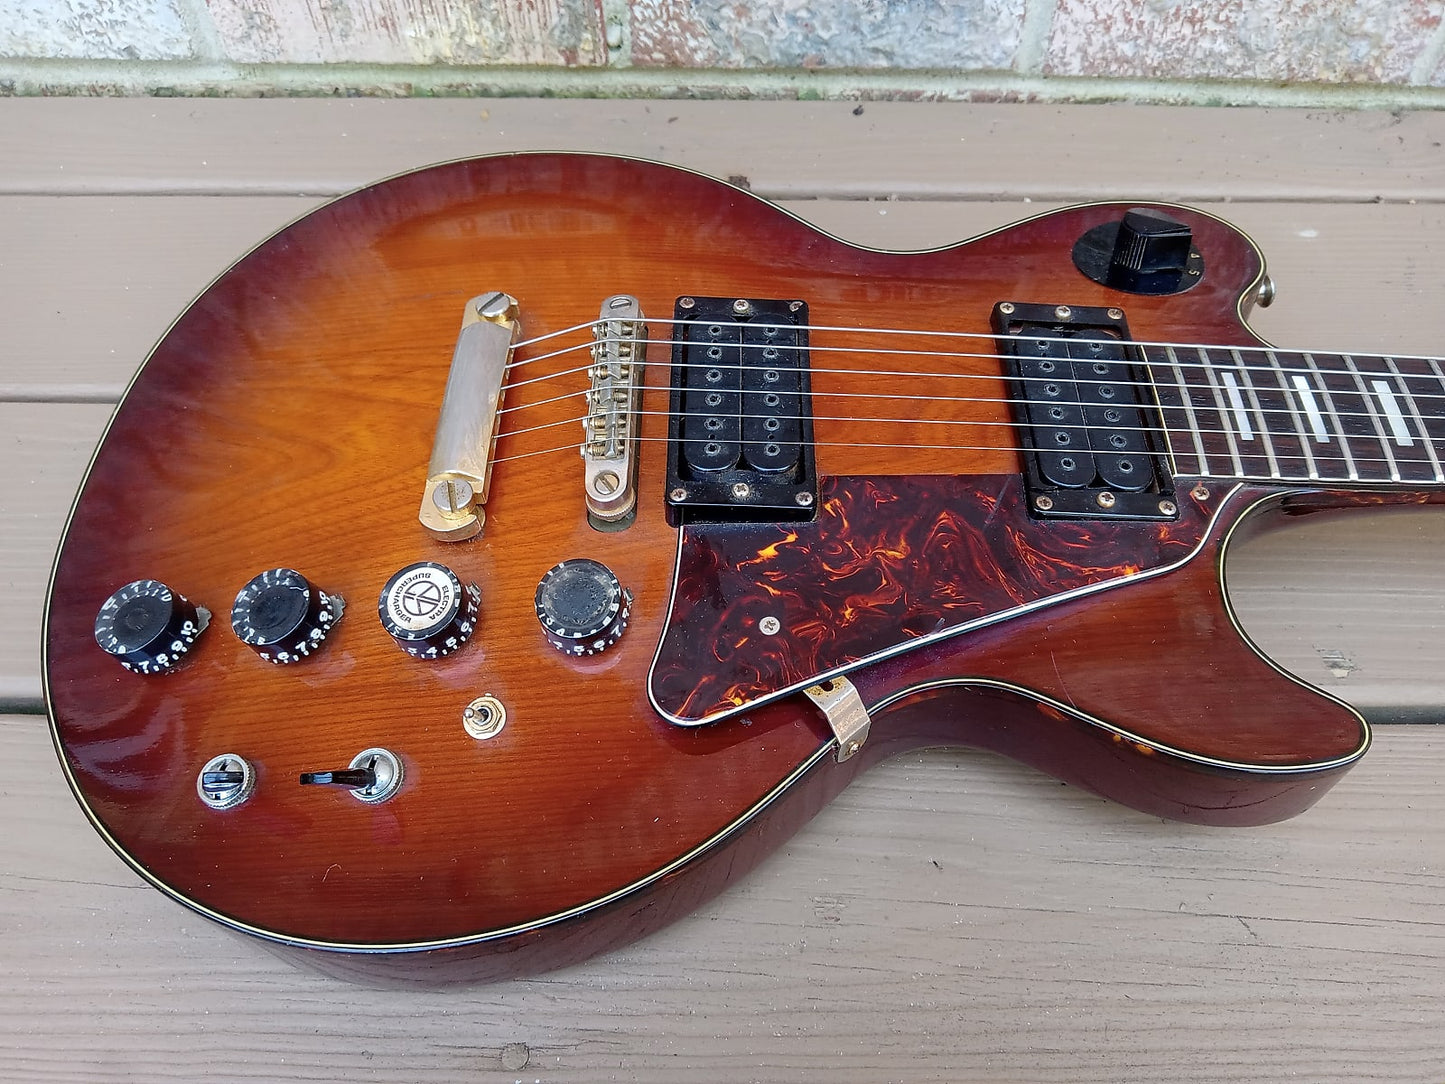 Electra MPC X950 Vulcan Tobacco Burst - 1982 - Project Guitar - Non Functioning Condition